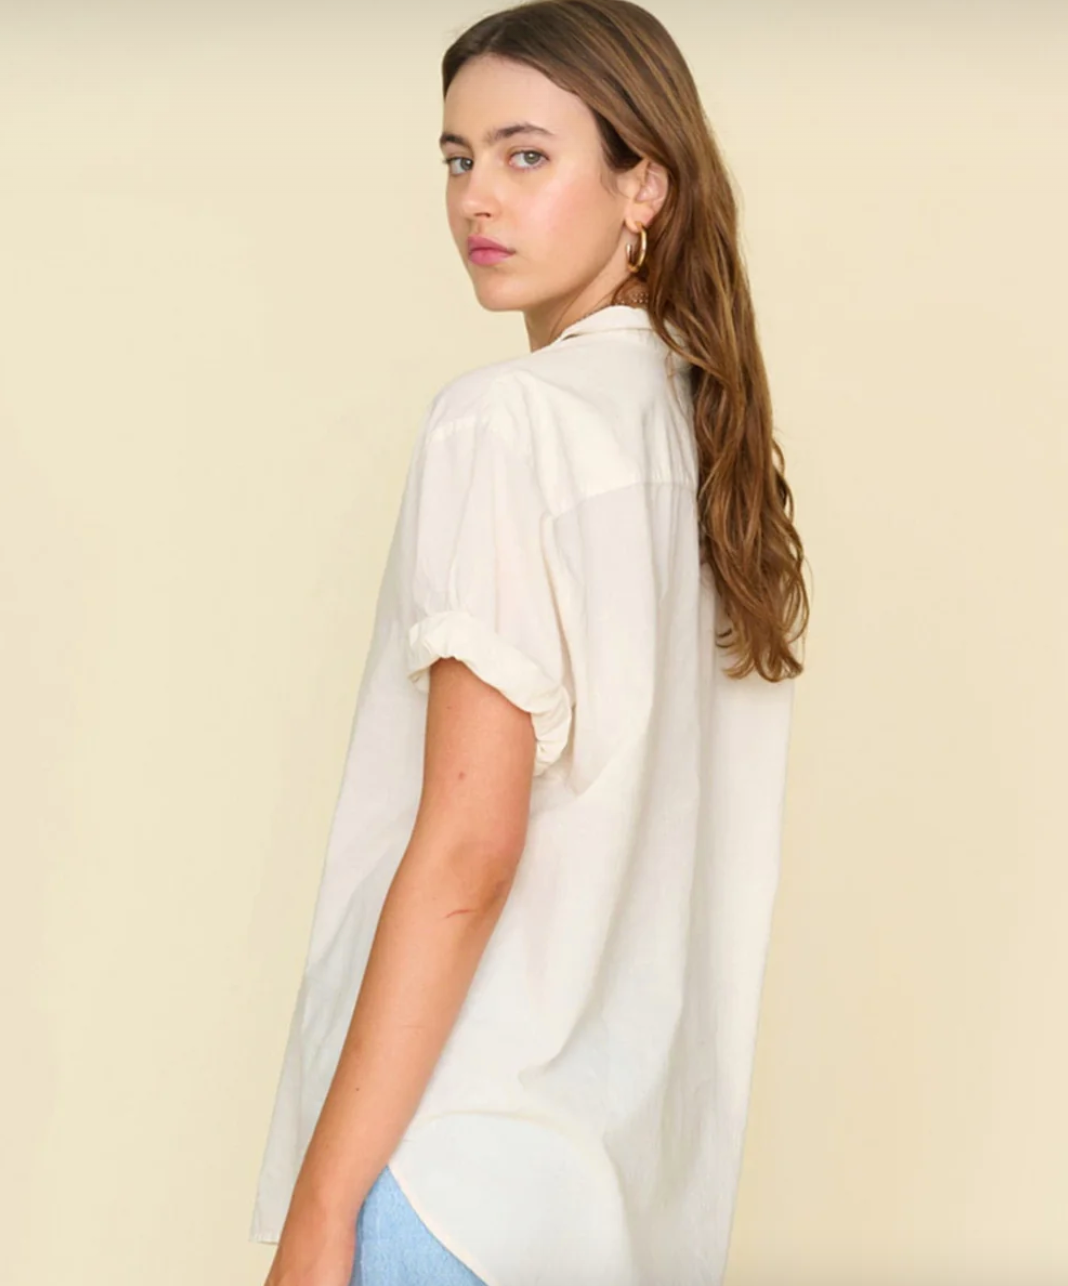 A person with long, brown hair is wearing a light-colored, short-sleeve Sand Channing Shirt by Xirena. They are standing against a beige background reminiscent of a Scottsdale Arizona bungalow, turned slightly to the side and looking over their shoulder at the camera with a neutral expression.